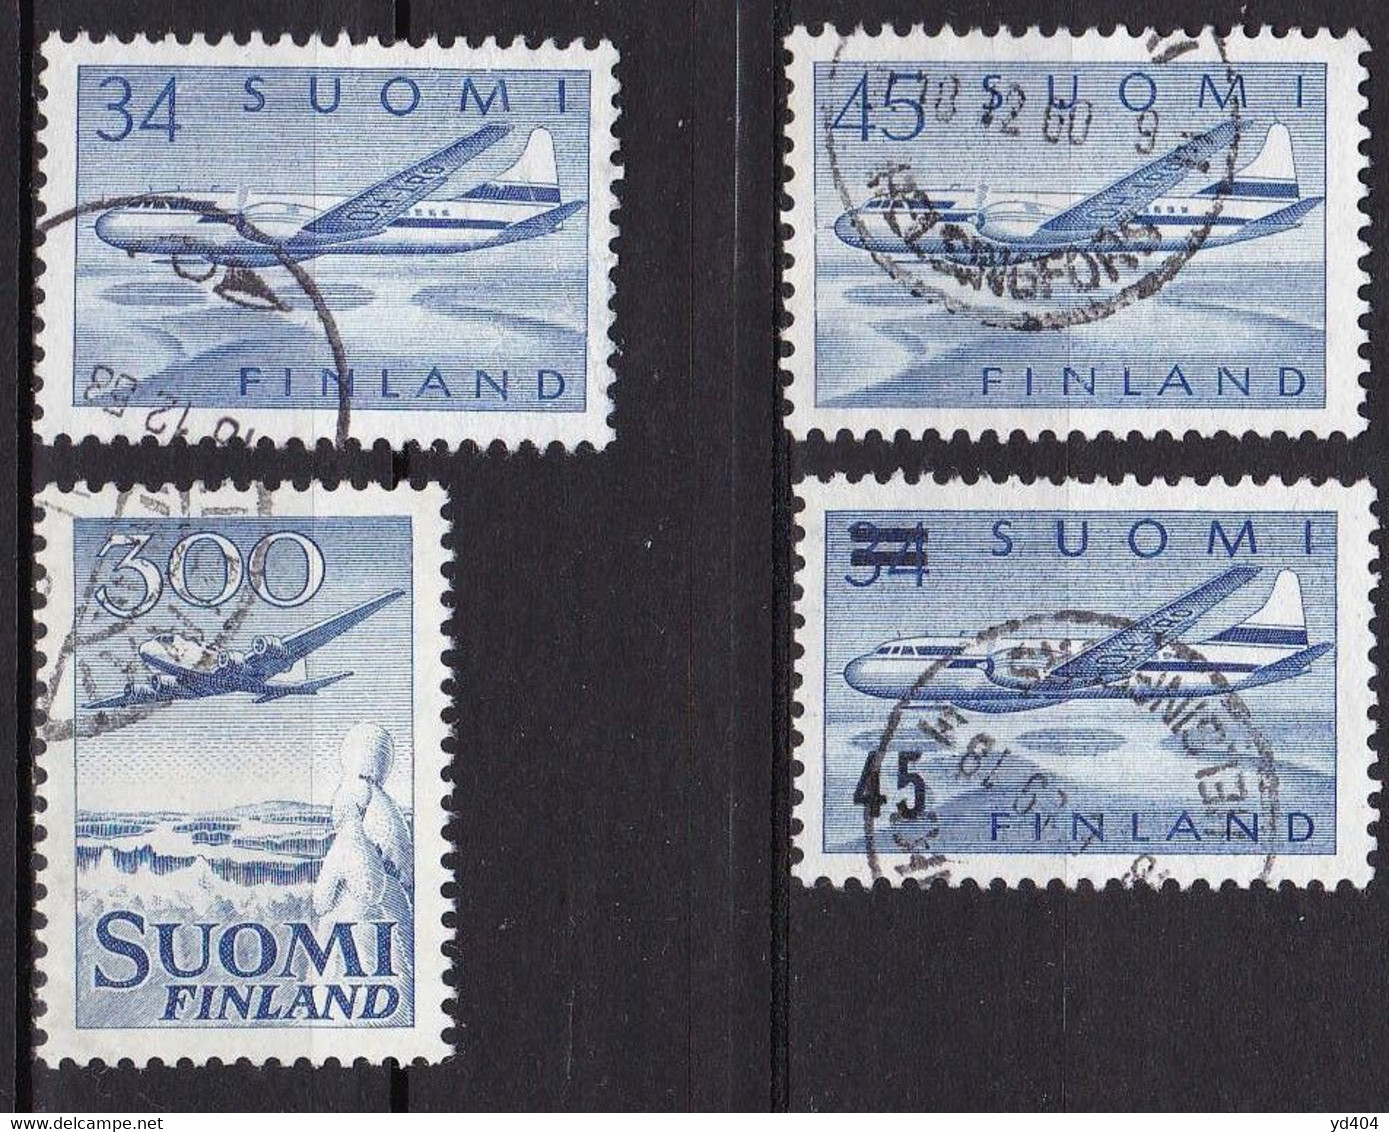 FI333 – FINLANDE – FINLAND – AIRMAIL - 1958-59 – Y&T 4/7 USED 8,50 € - Used Stamps